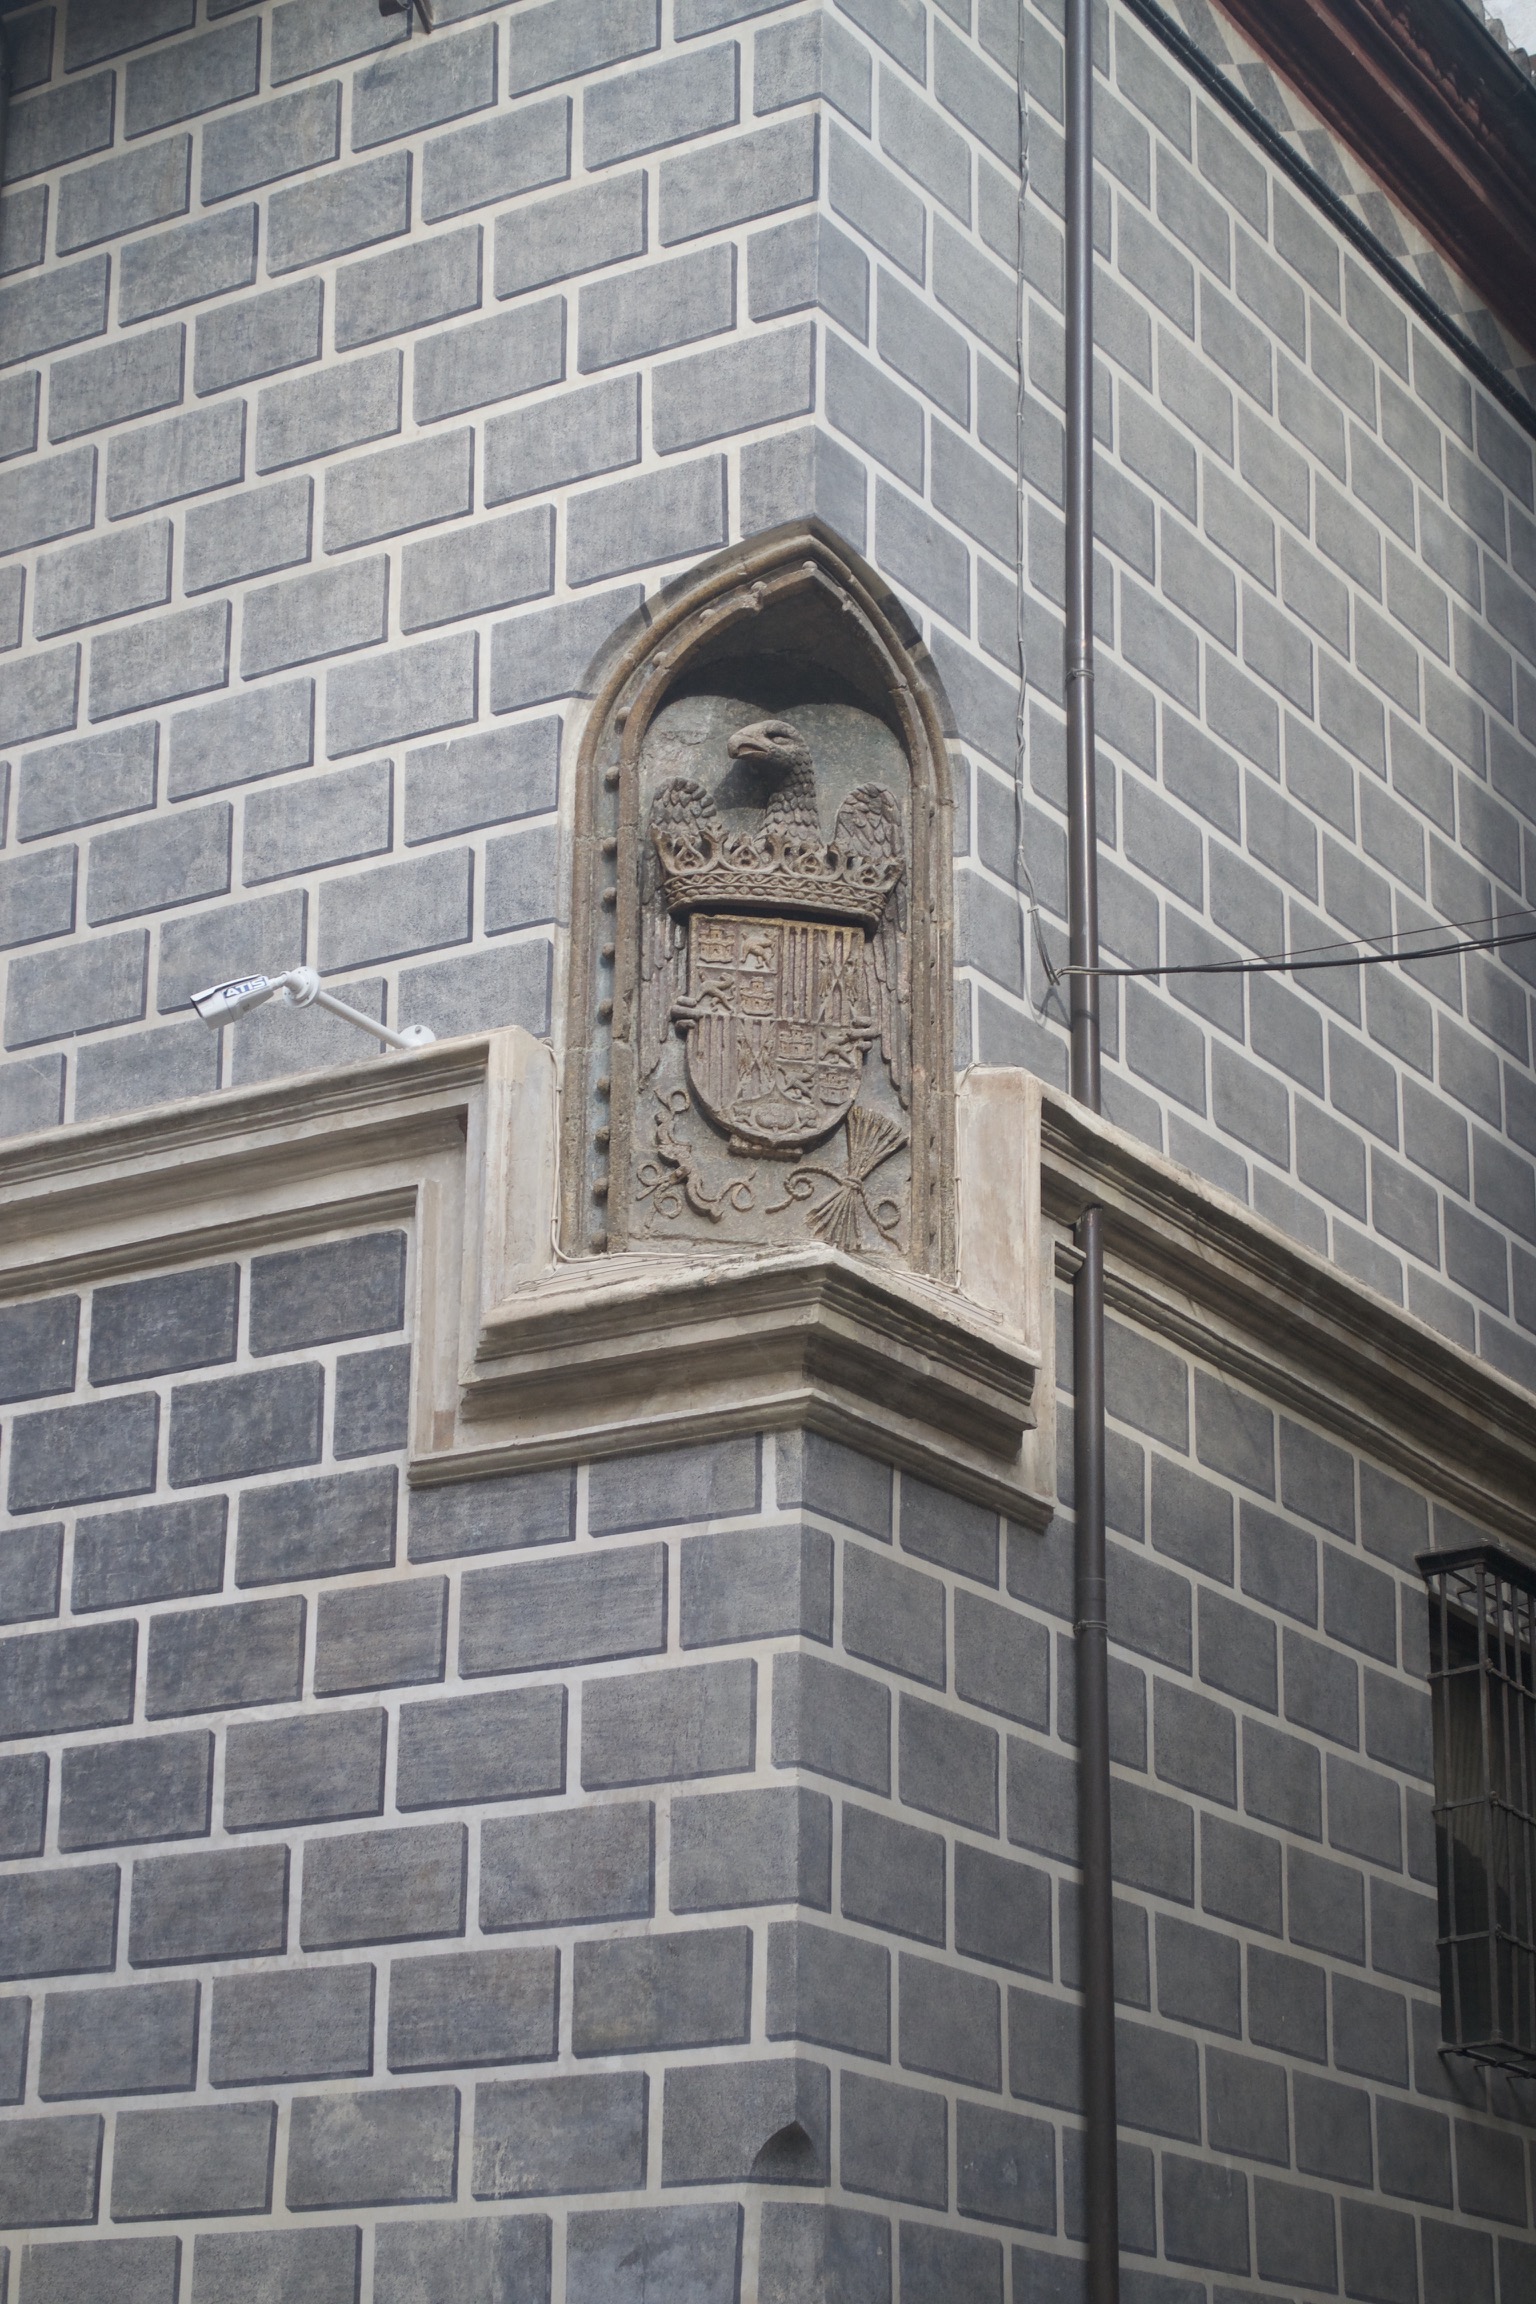 A coat of arms is built into the corner of a gray brick building.